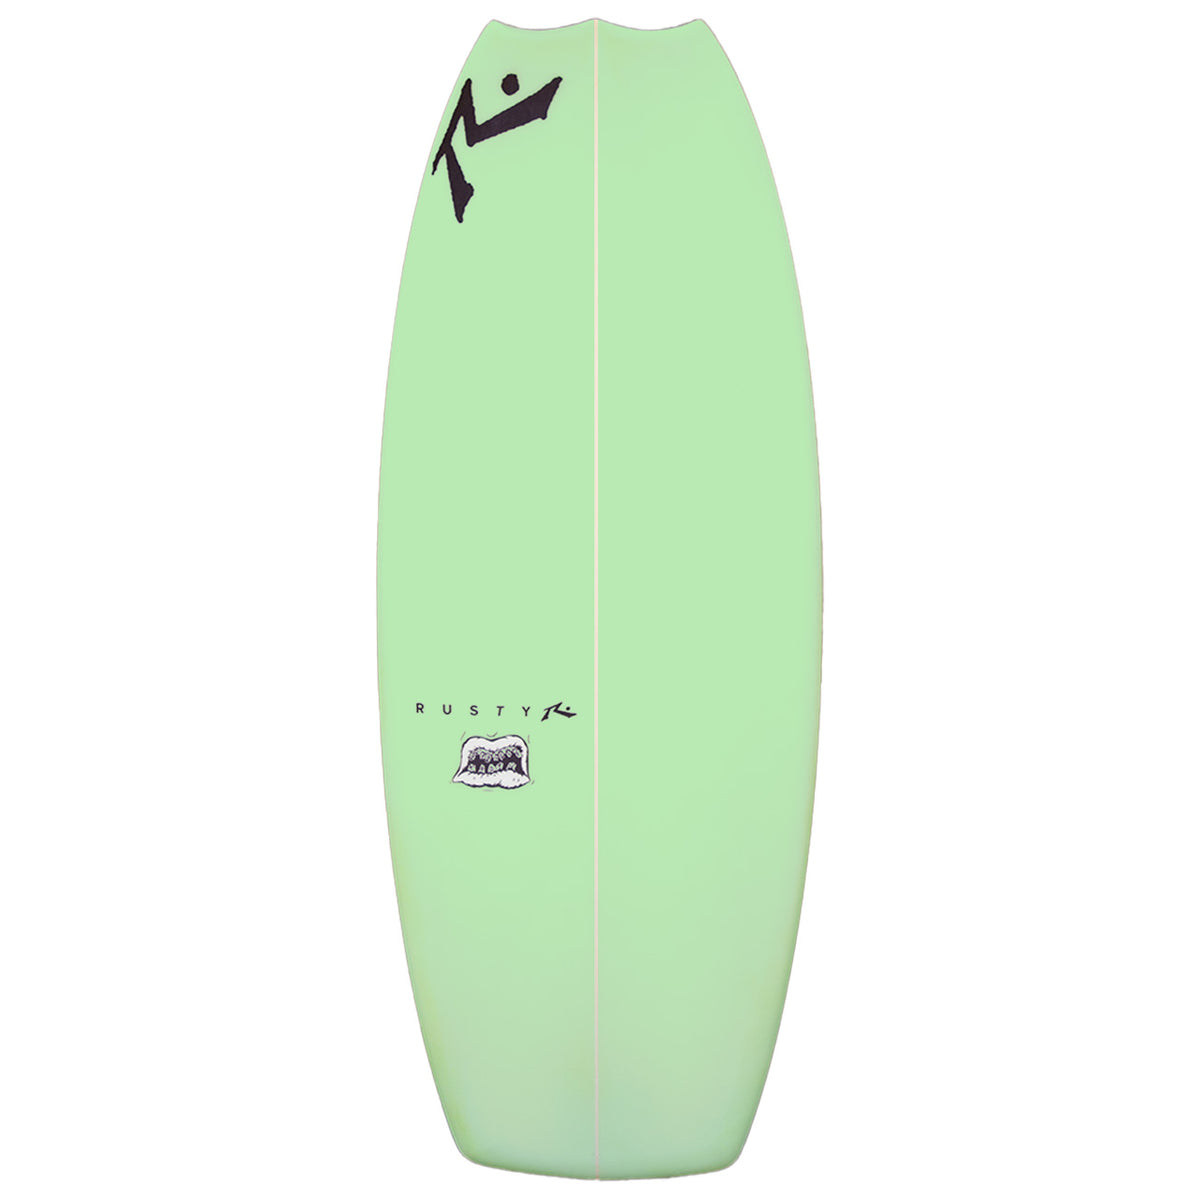 Snaggle Tooth 2.0 Wakesurf Board - Rusty Surfboards - Deck View - Green